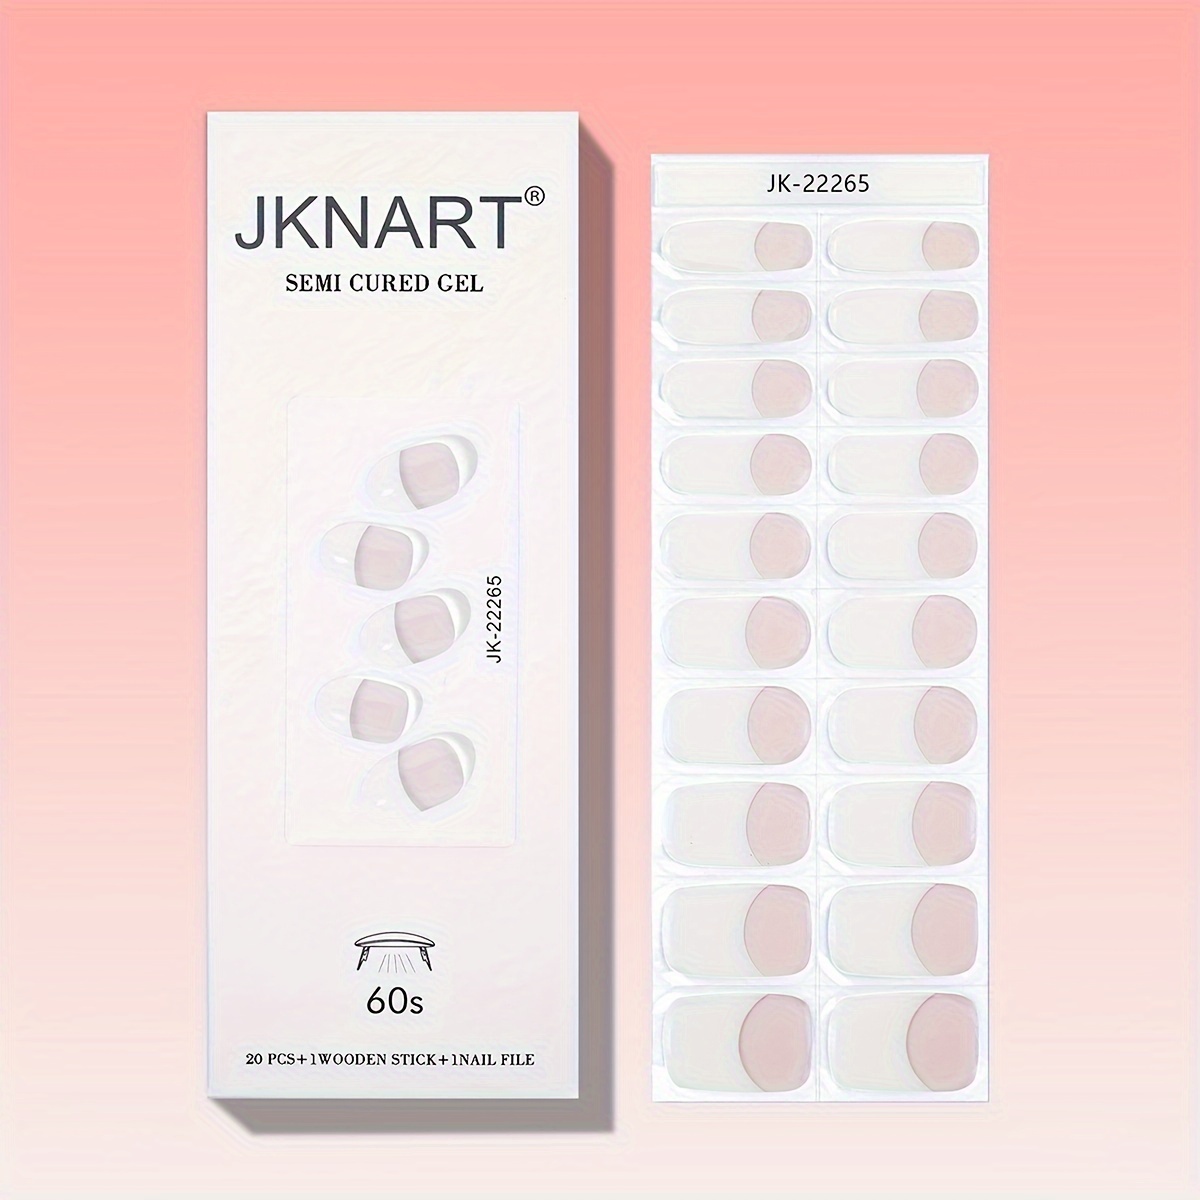 

Jknart Semi-cured Gel Nail Polish Strips, Uv Light Curing Required, Waterproof French Manicure Decals, Geometric Resin Self-adhesive, Glitter Finish, No Scent, For Hands & Feet Care -